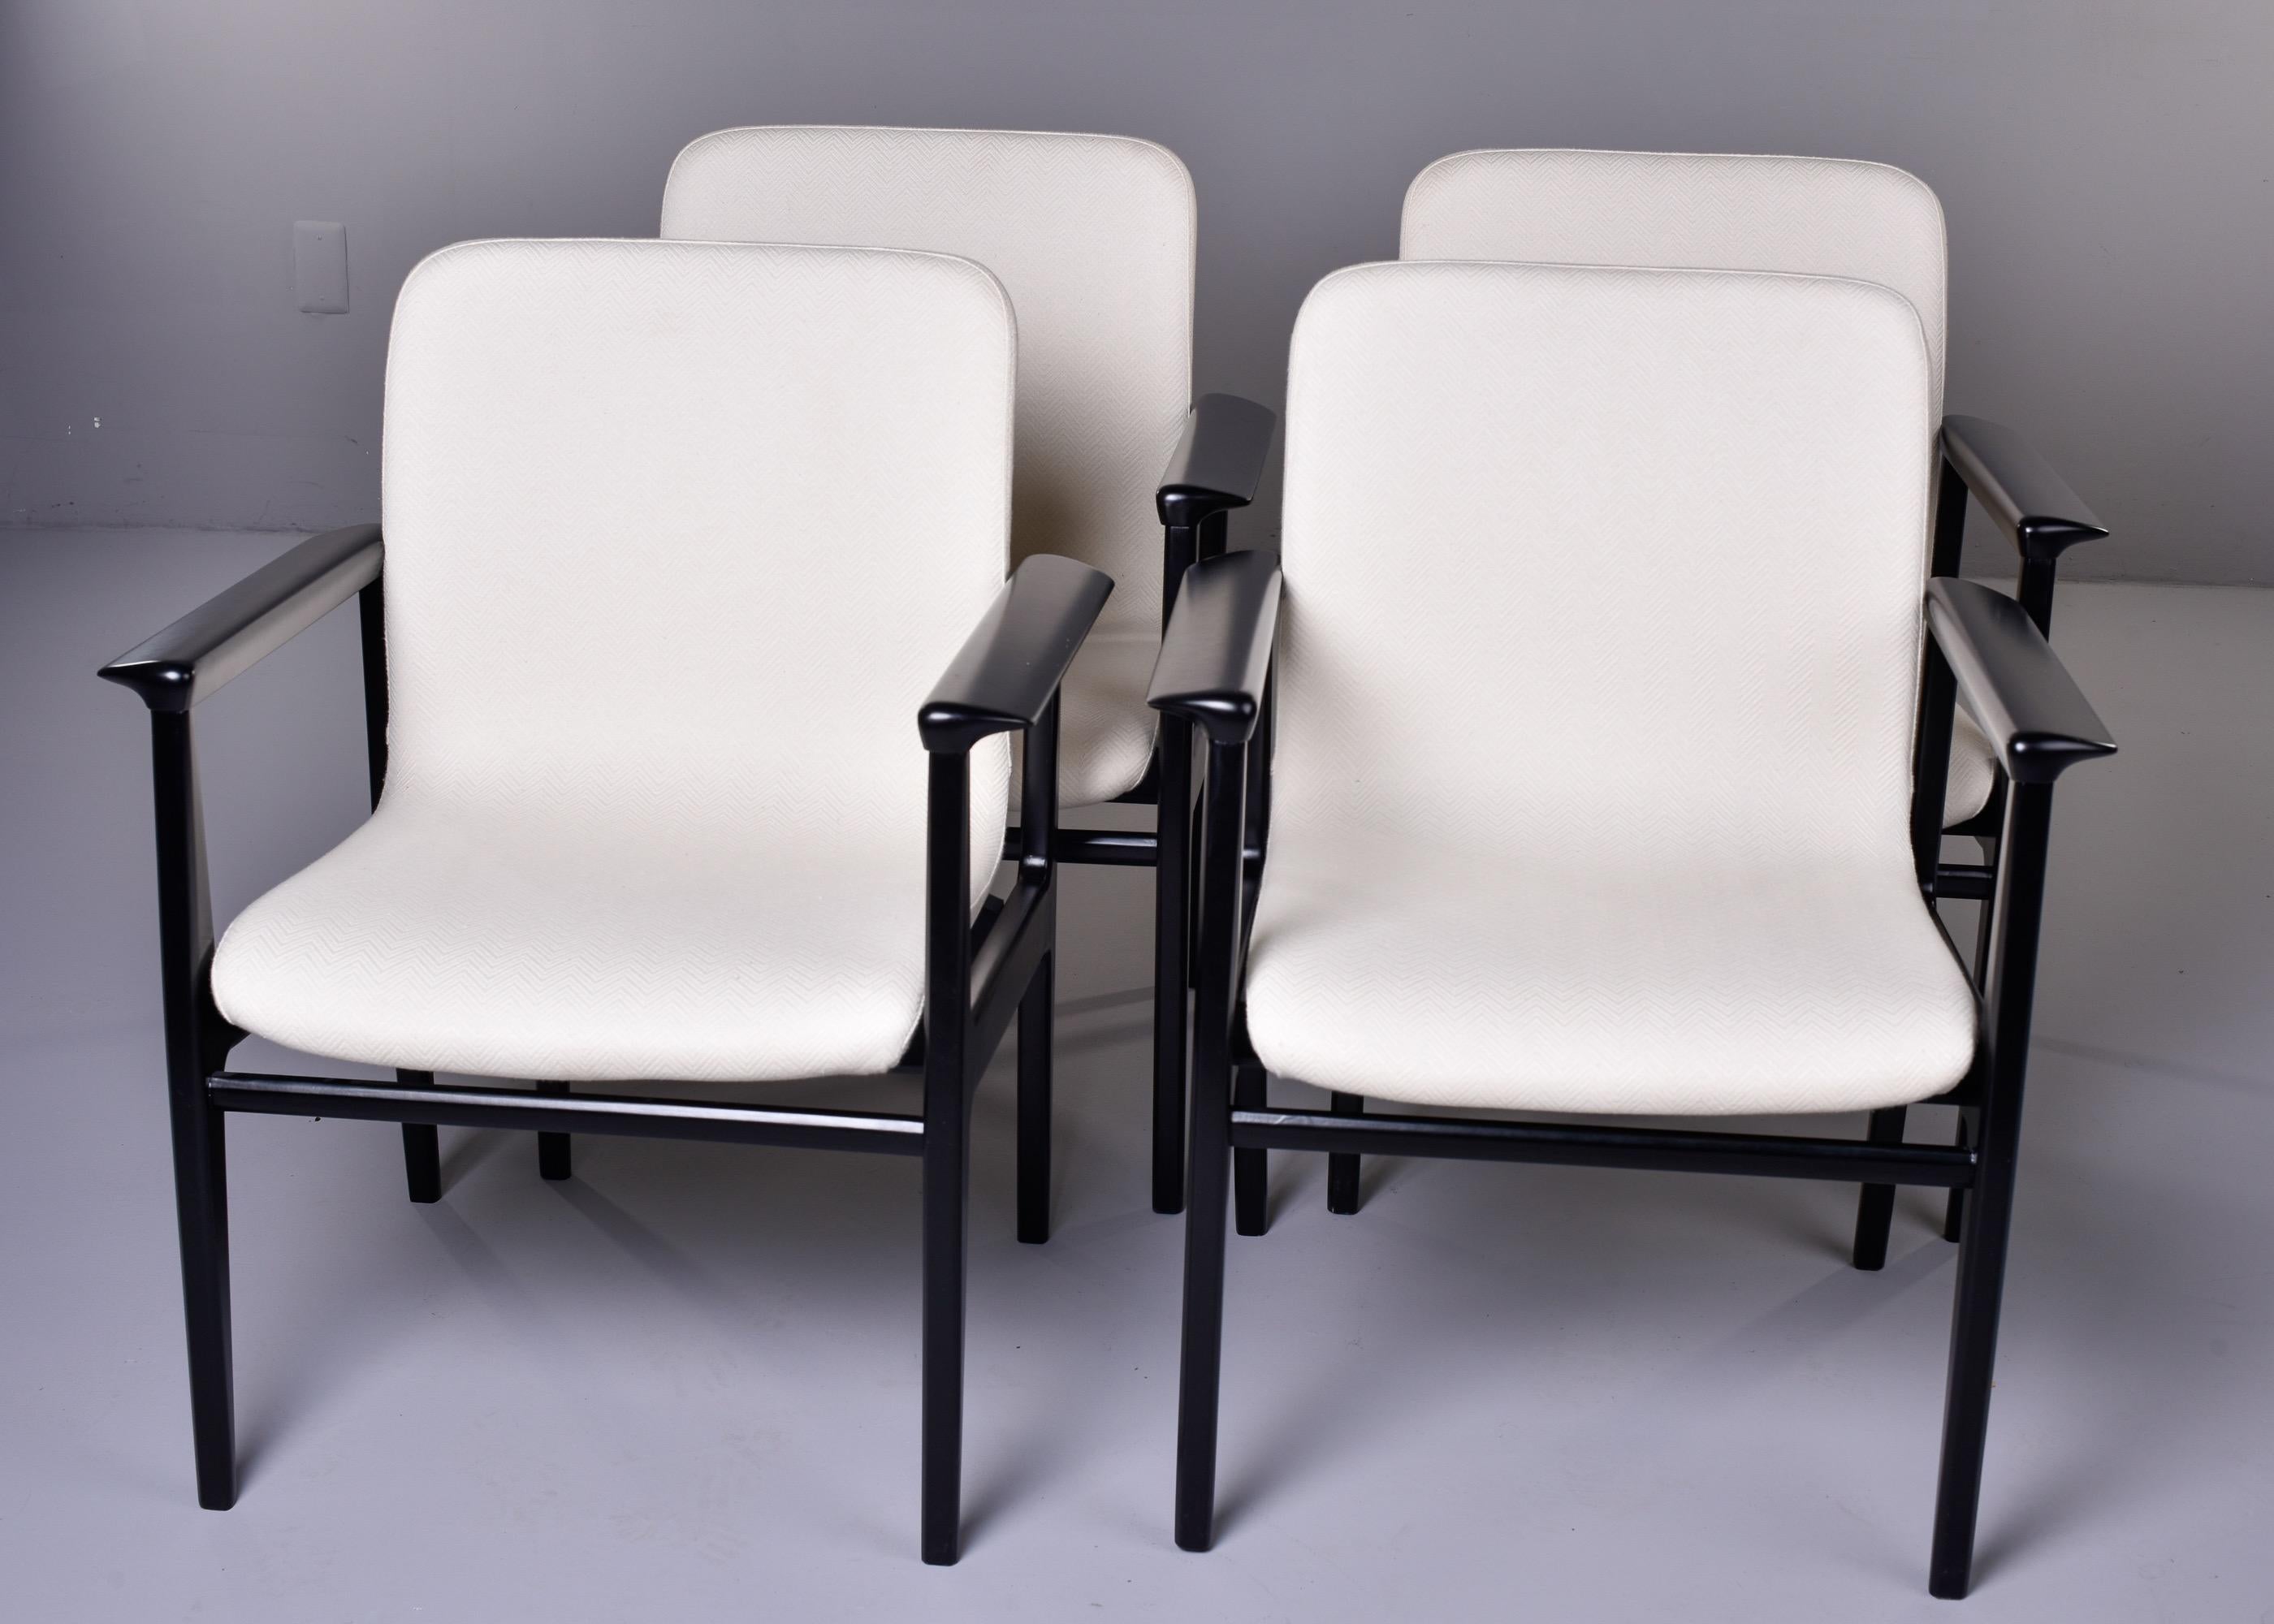 Found in Italy, this set of four circa 1970s armchairs feature black lacquered sleek wood frames with tapered legs and molded seats upholstered in a white, chevron pattern weave. Unknown maker. Sold and priced as a set of four. 

Measures: Arm